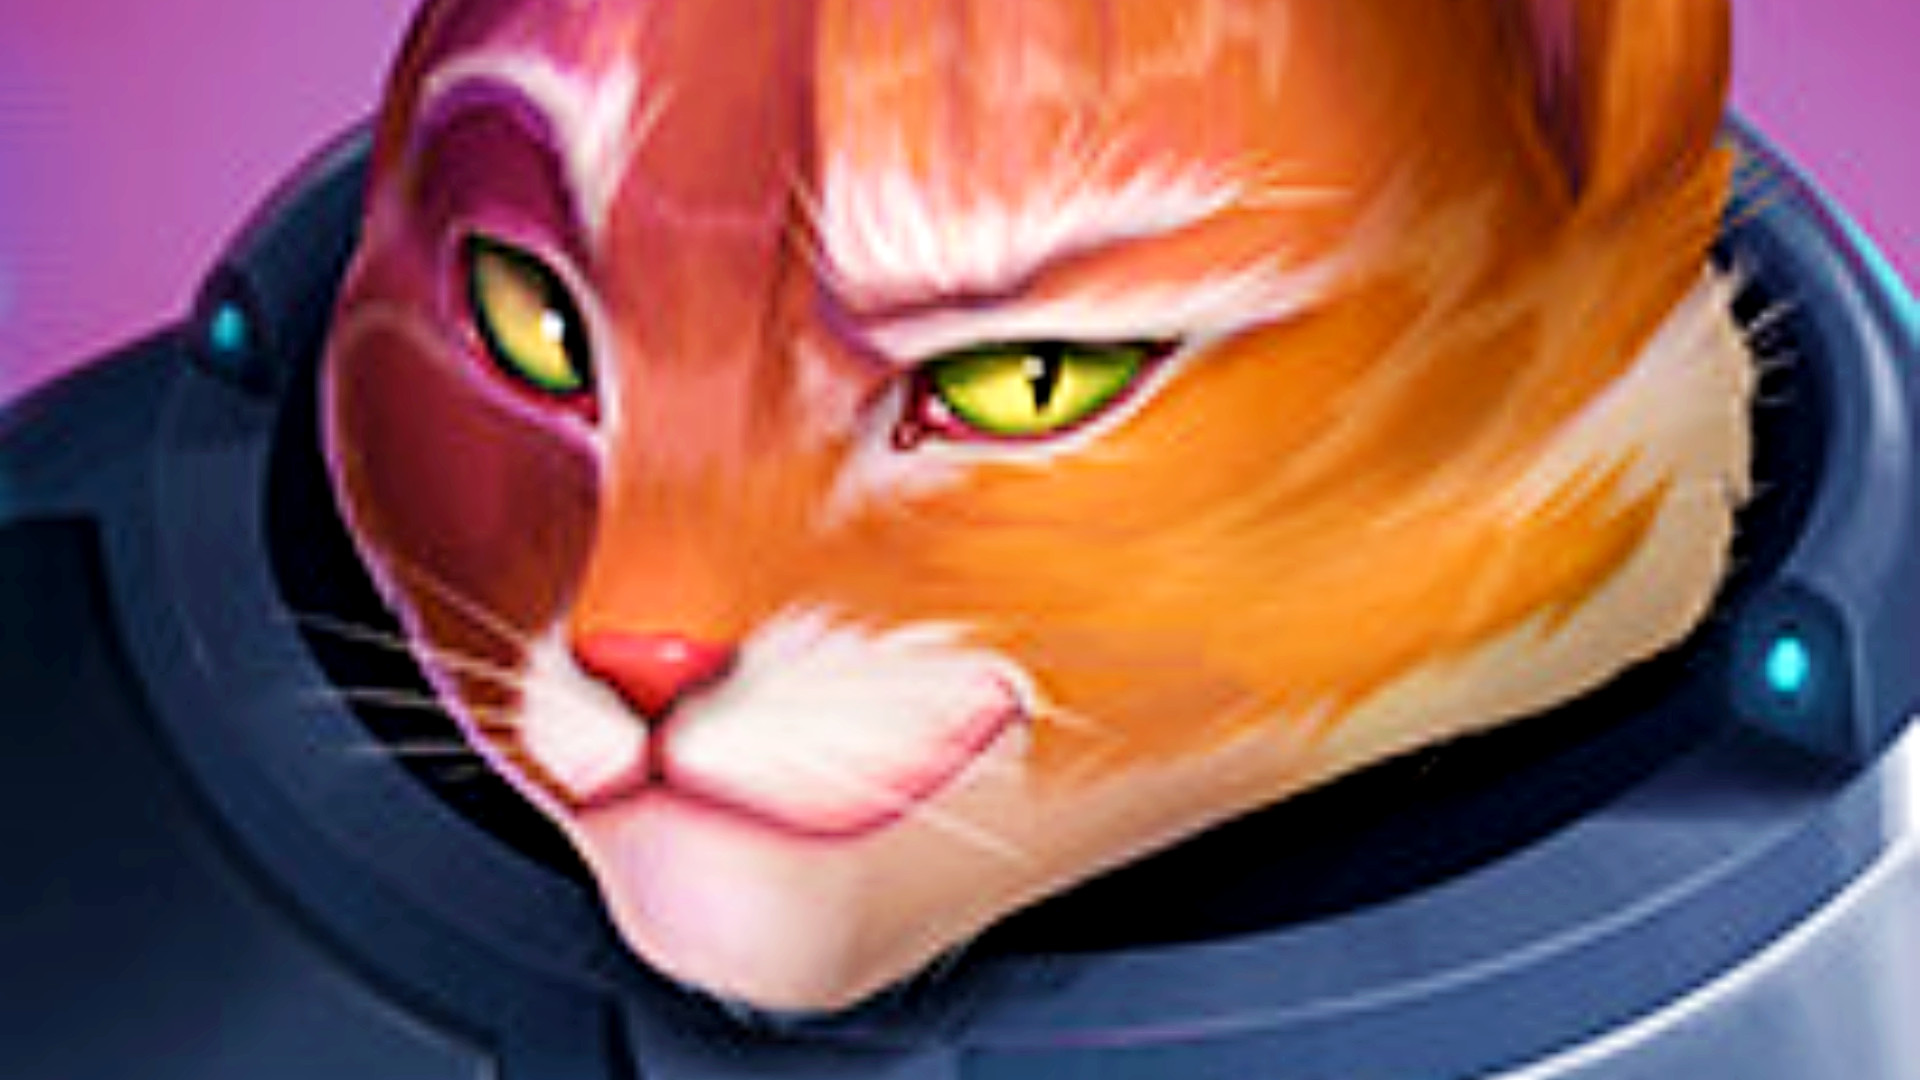 Space Cats Tactics on Steam